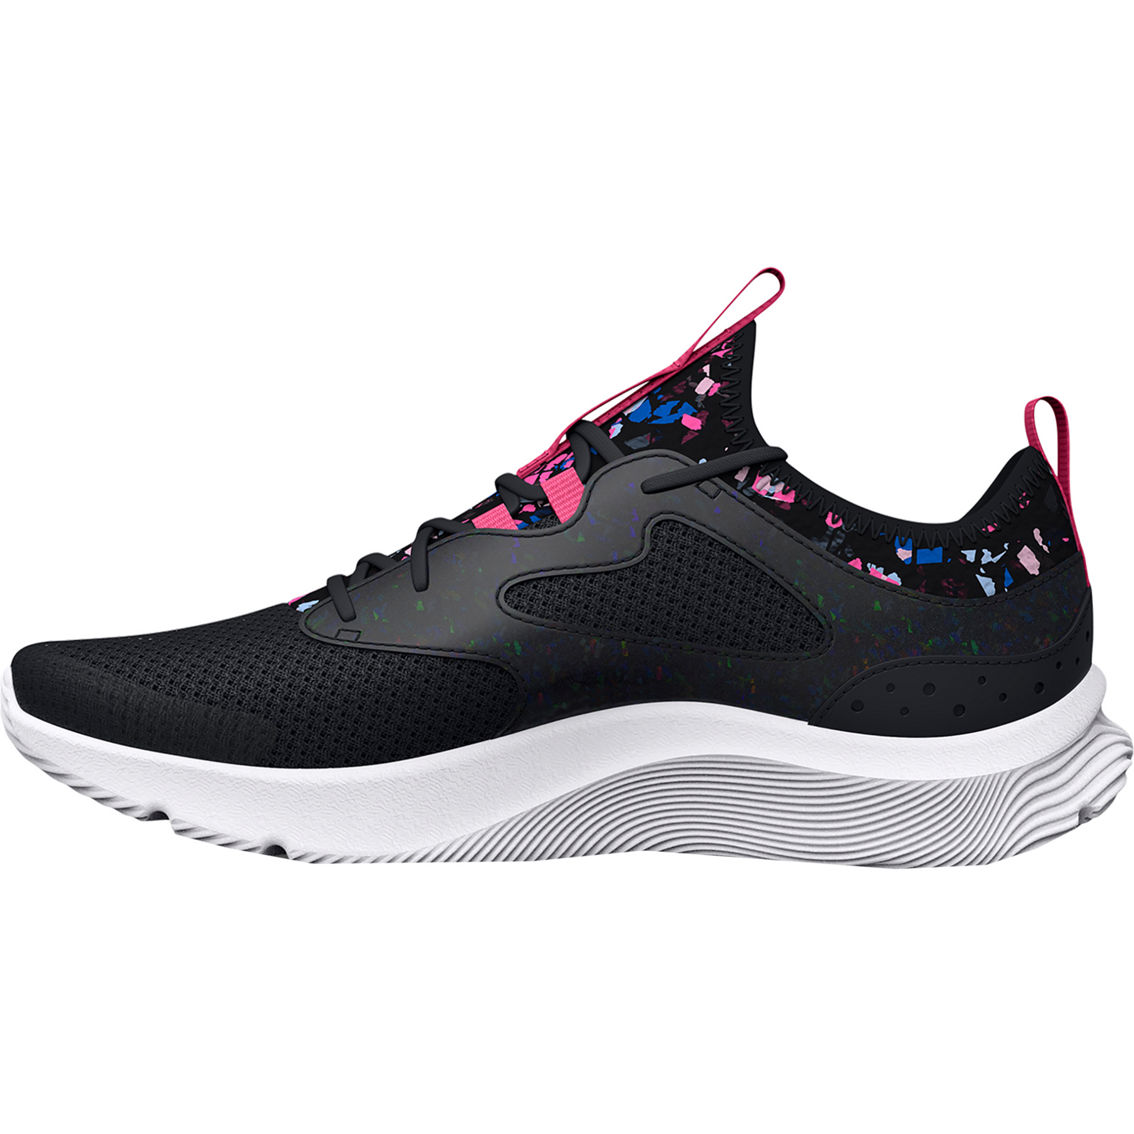 Under Armour Grade School Girls Infinity 2.0 Printed Running Shoes - Image 3 of 5